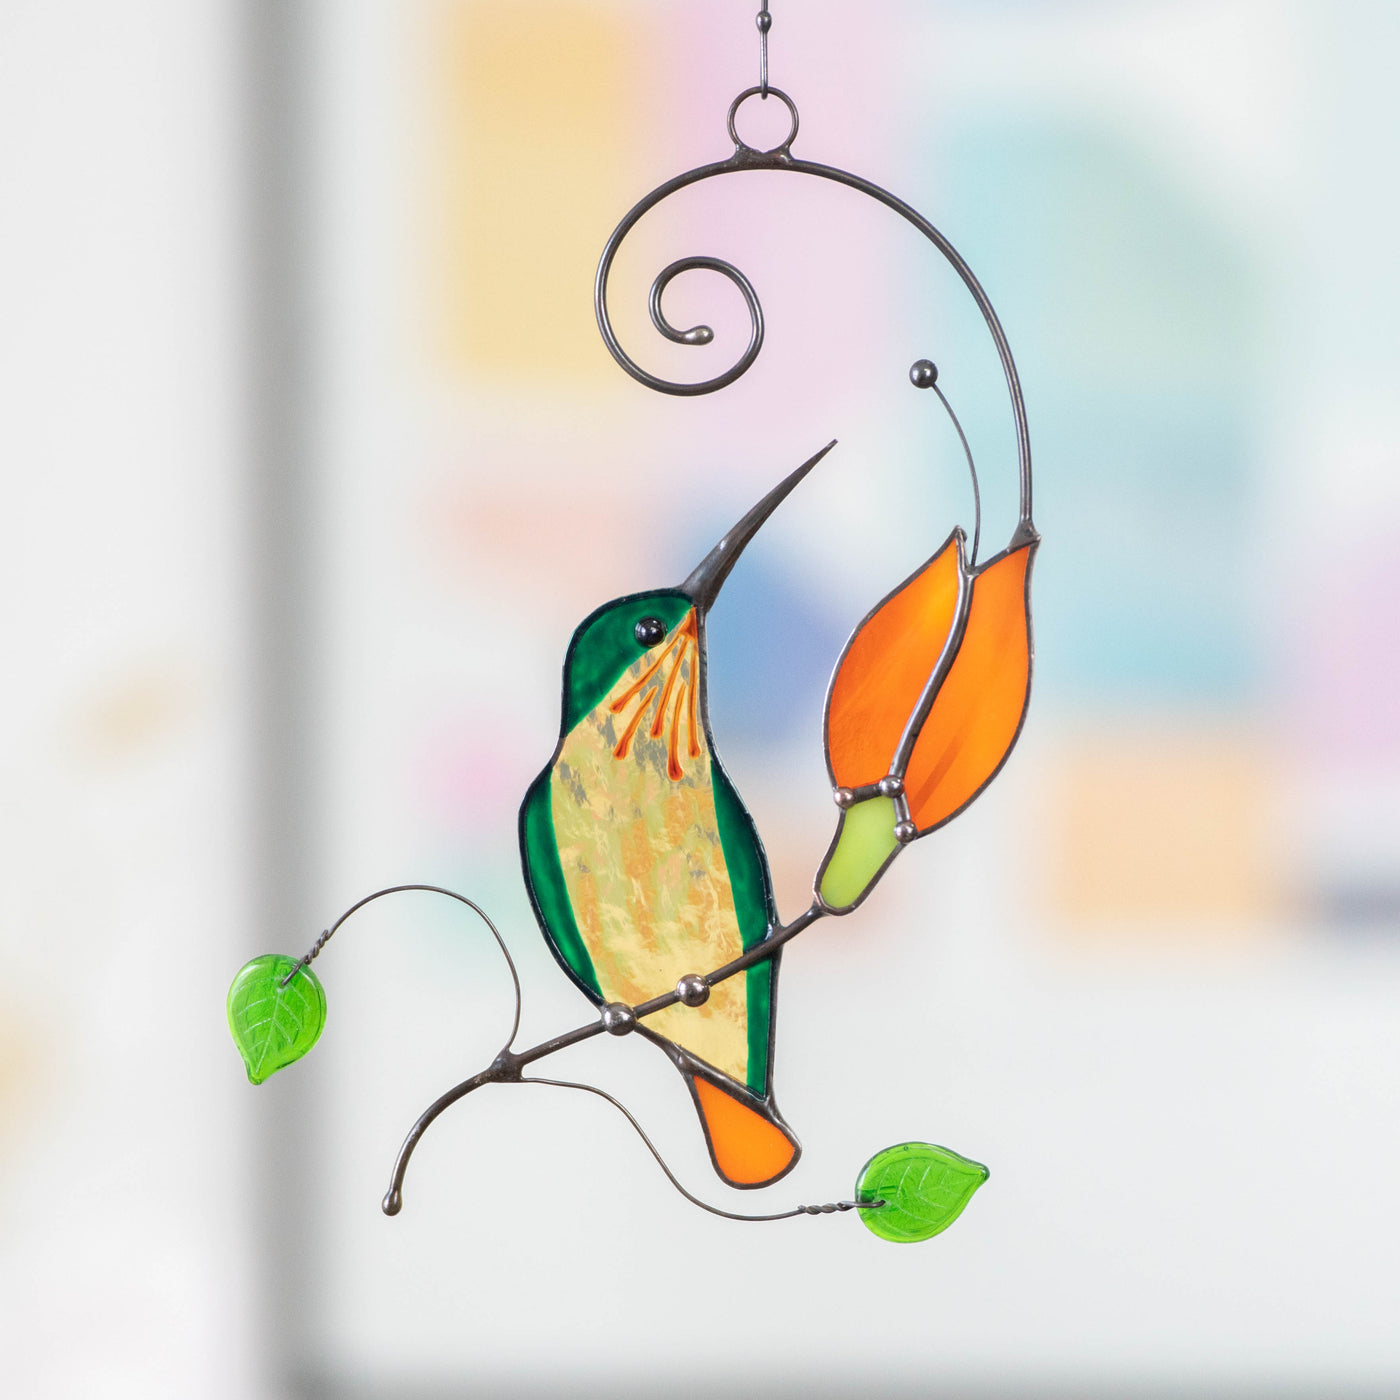 Stained glass hummingbird sitting on the branch with orange flower suncatcher